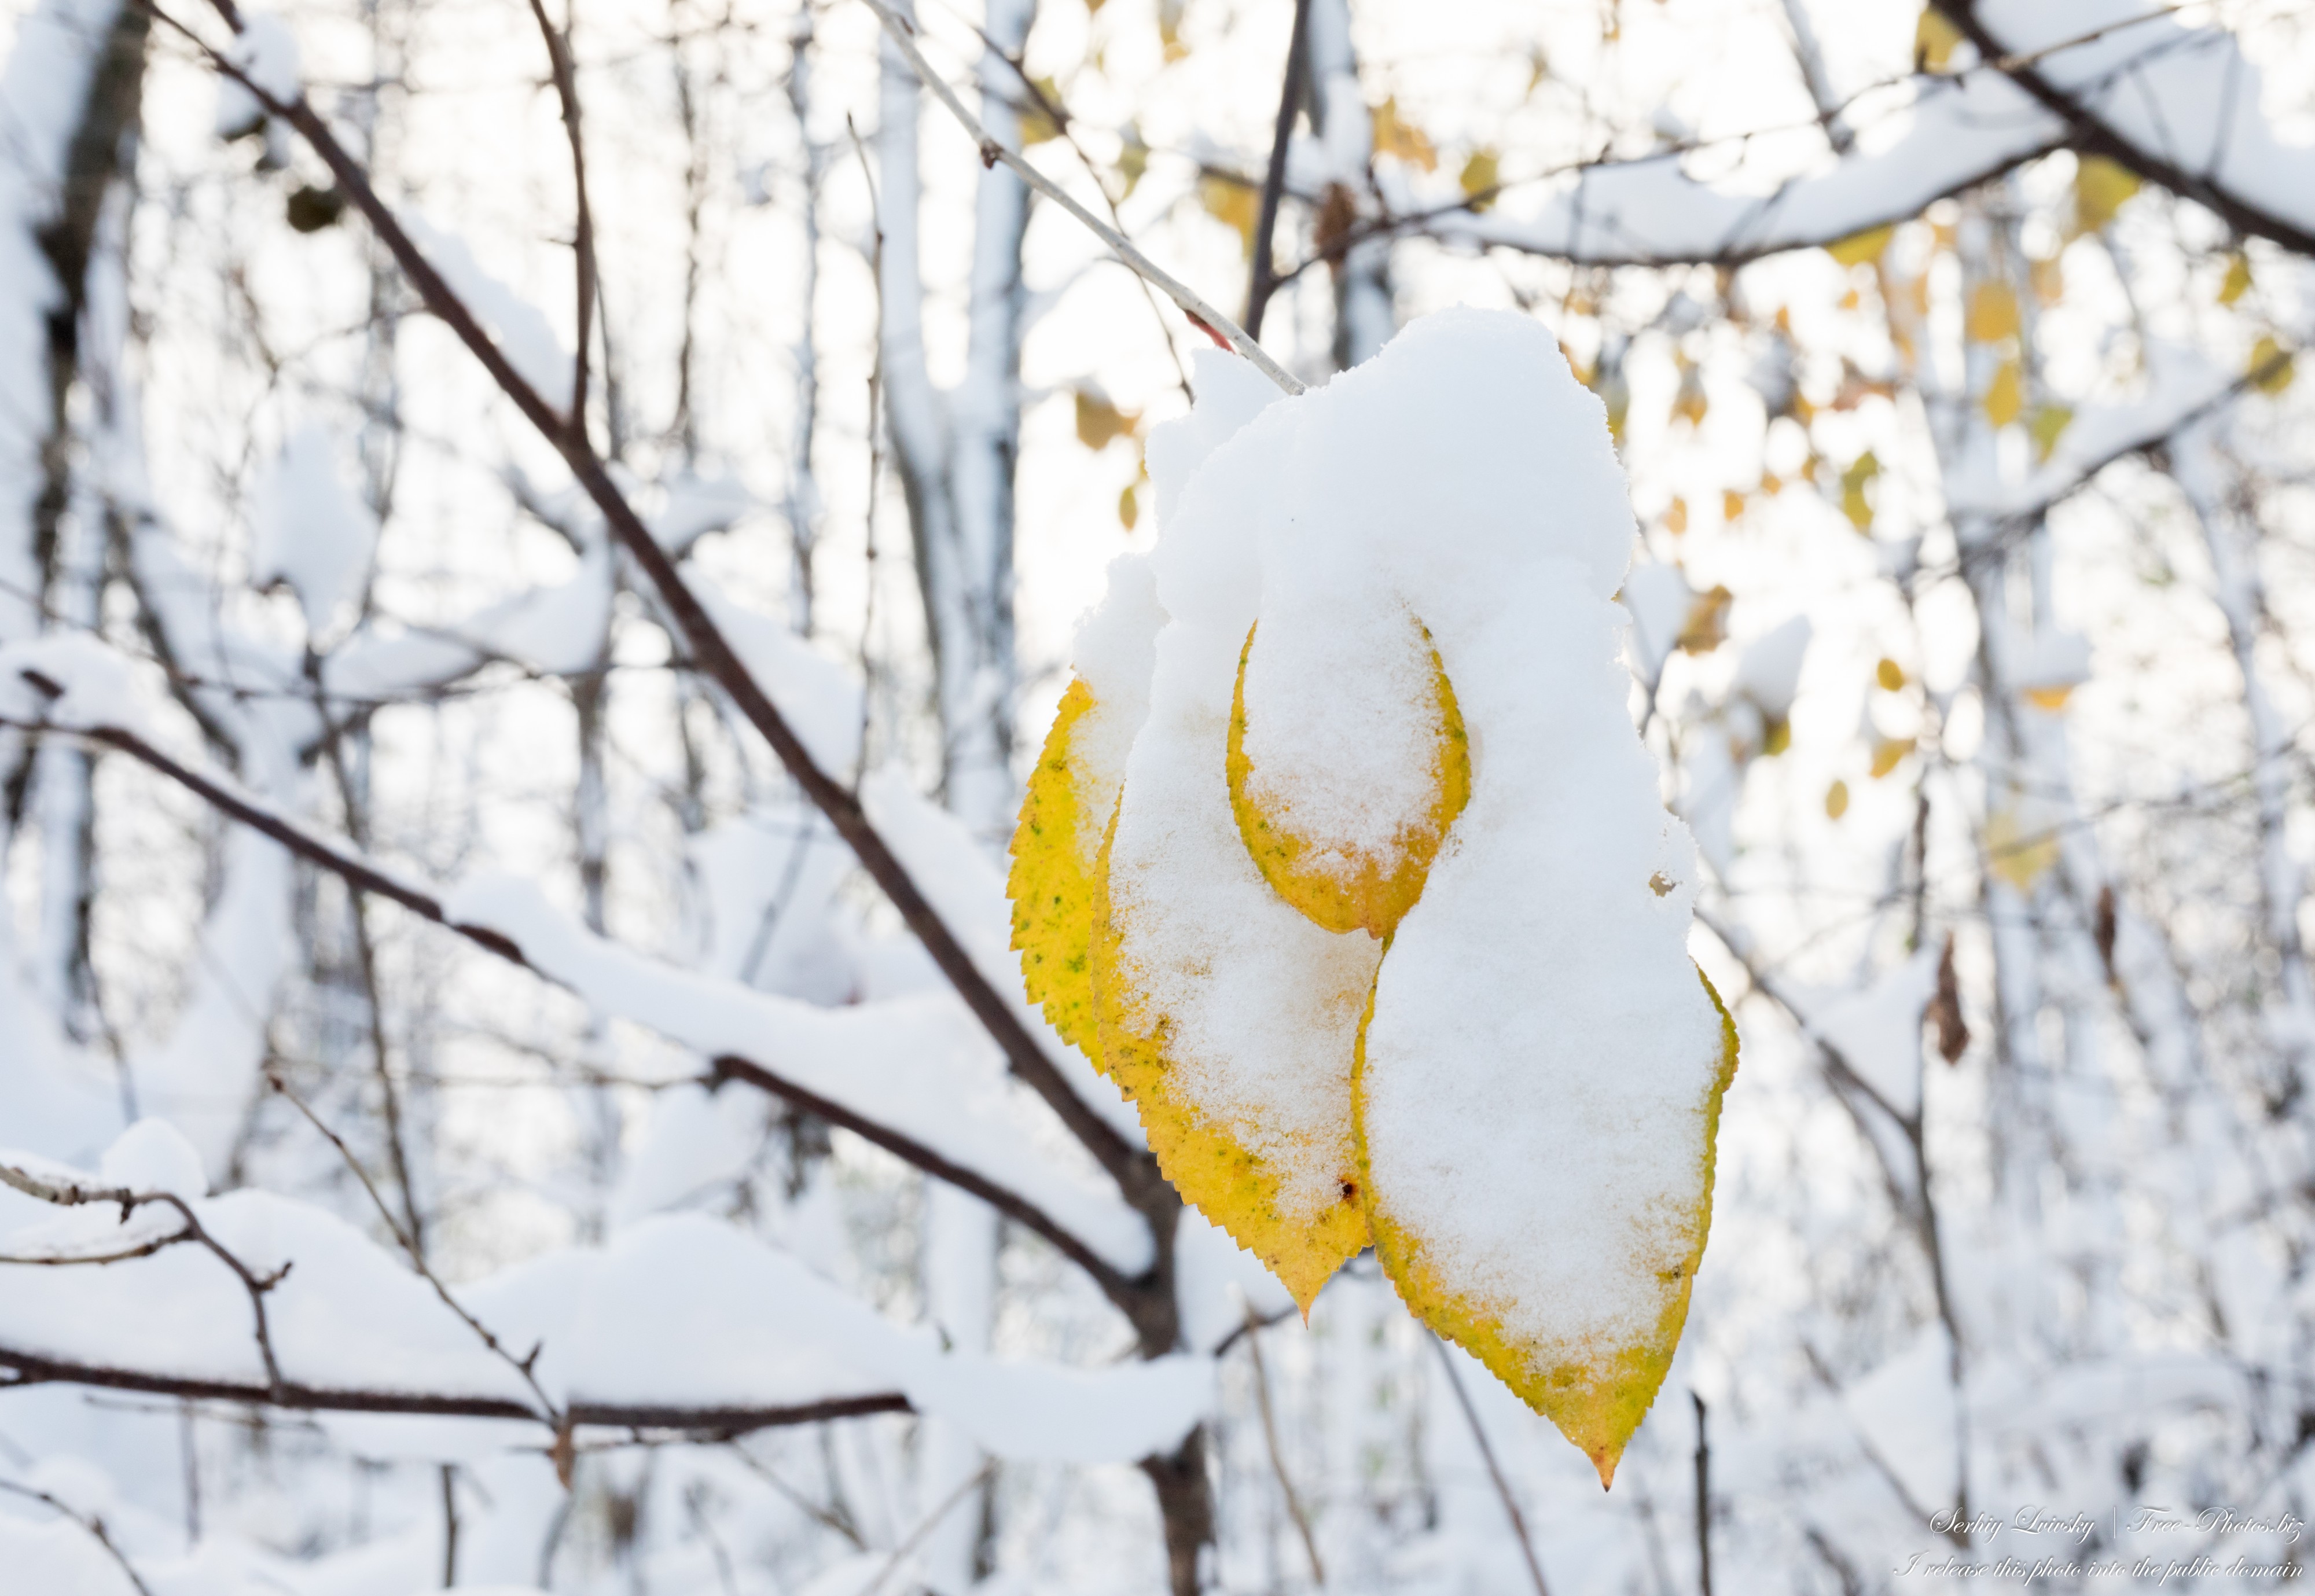 yellow leaves covered with snow in Lviv region of Ukraine in November 2022 photographed by Serhiy Lvivsky